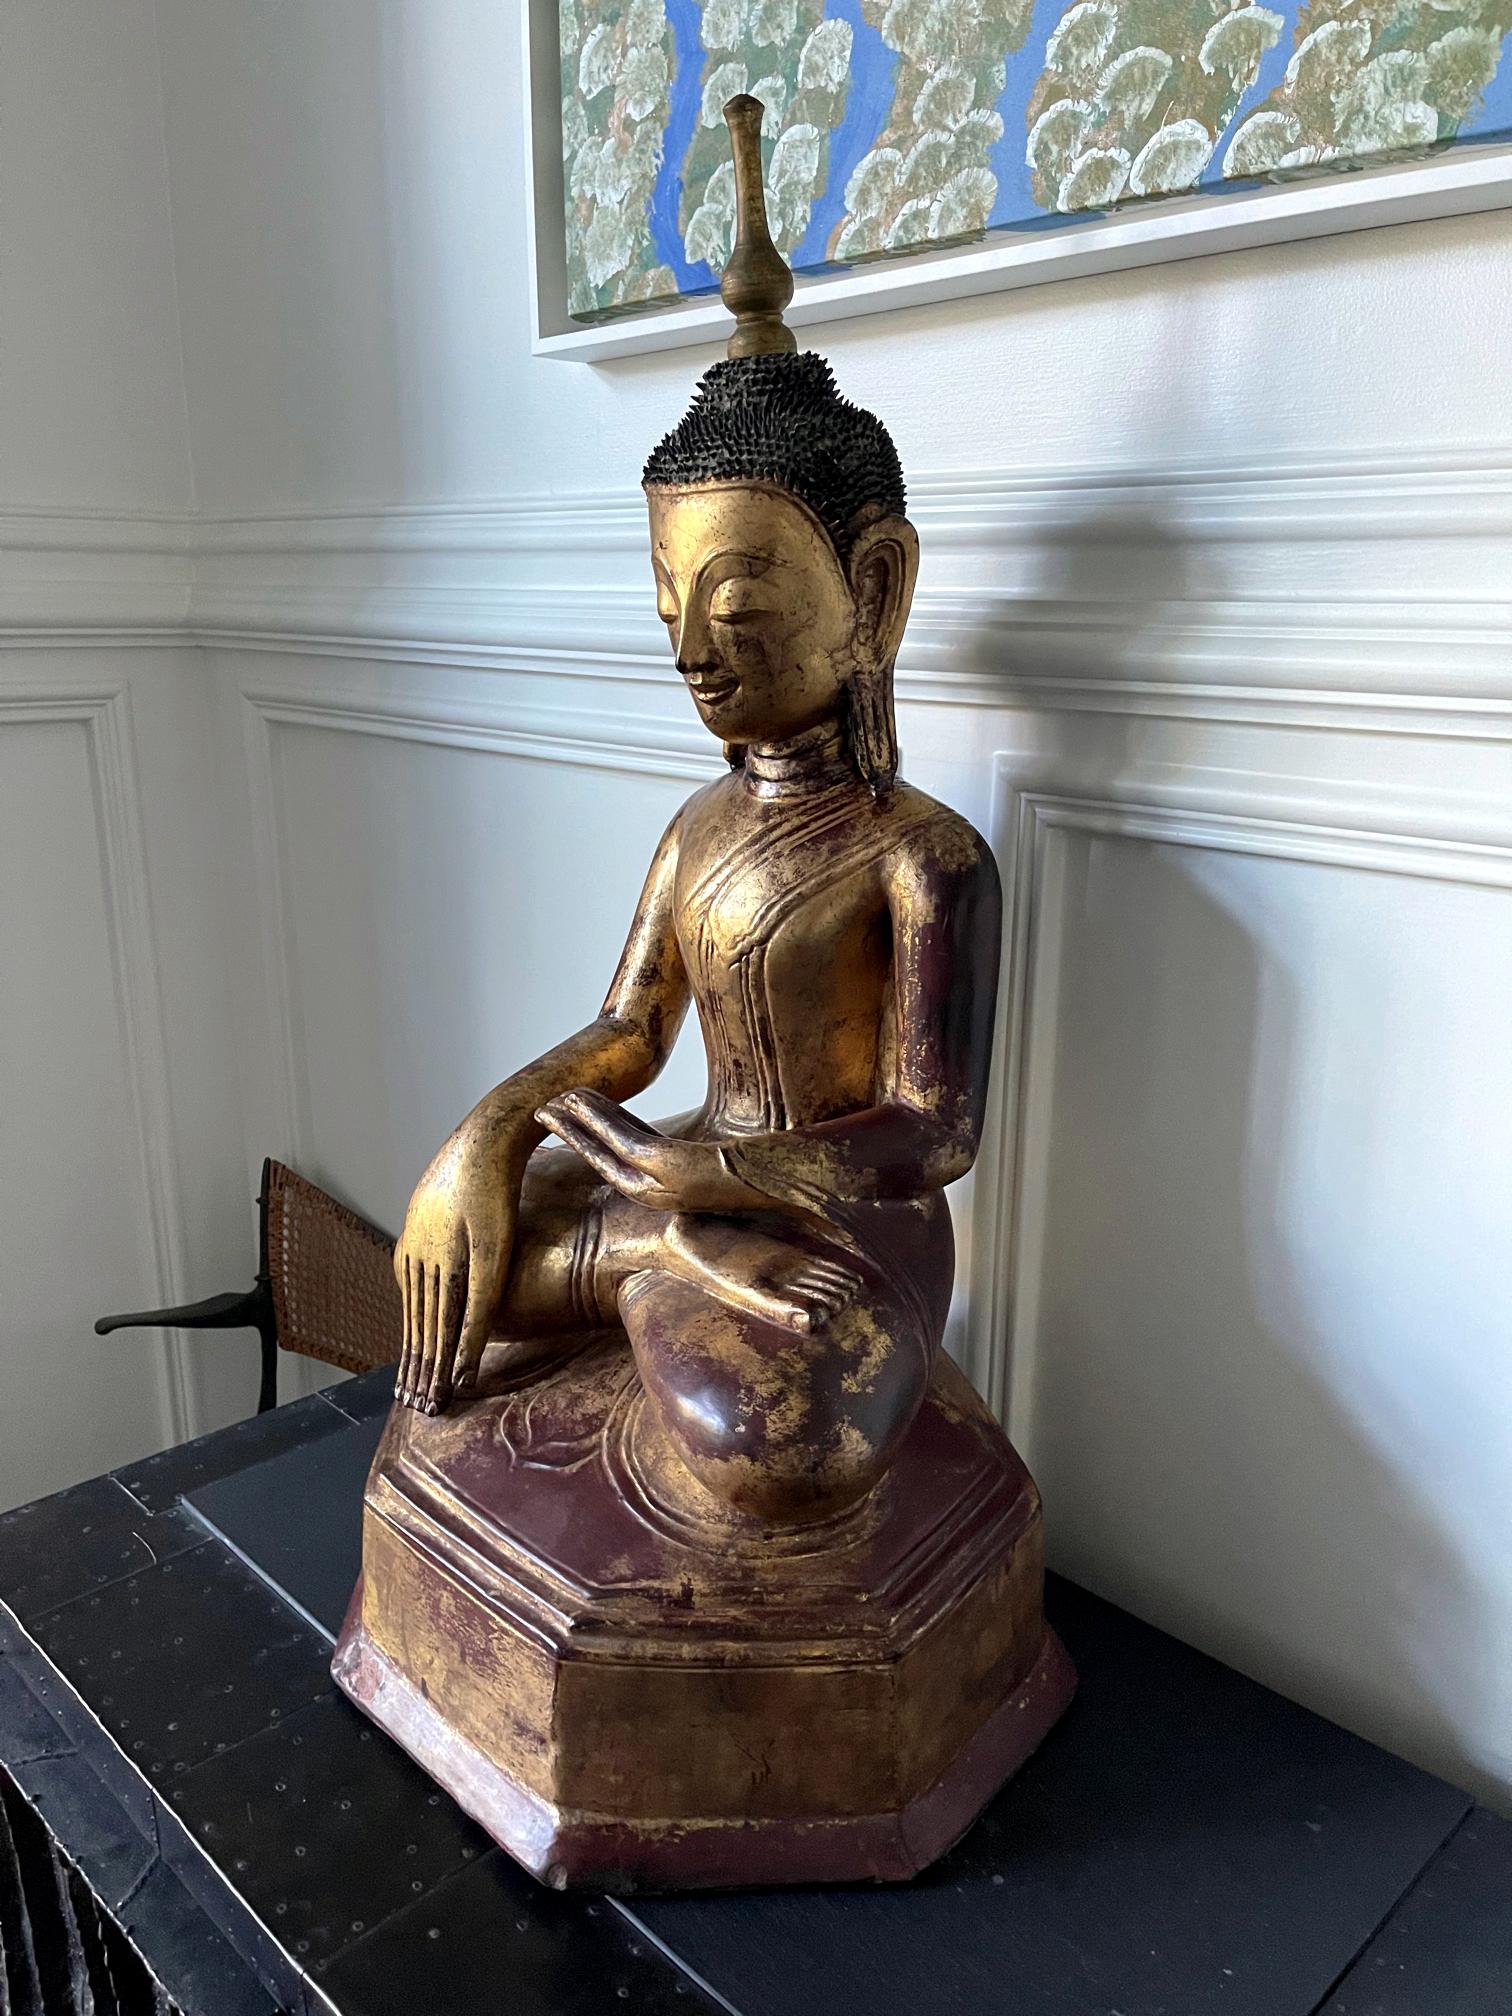 A gilt and lacquered wood Buddha statue from Southeast Asia likely Burma, circa 19th century. The Buddha is depicted as seating on a slightly tapered multifaceted plinth throne in an 